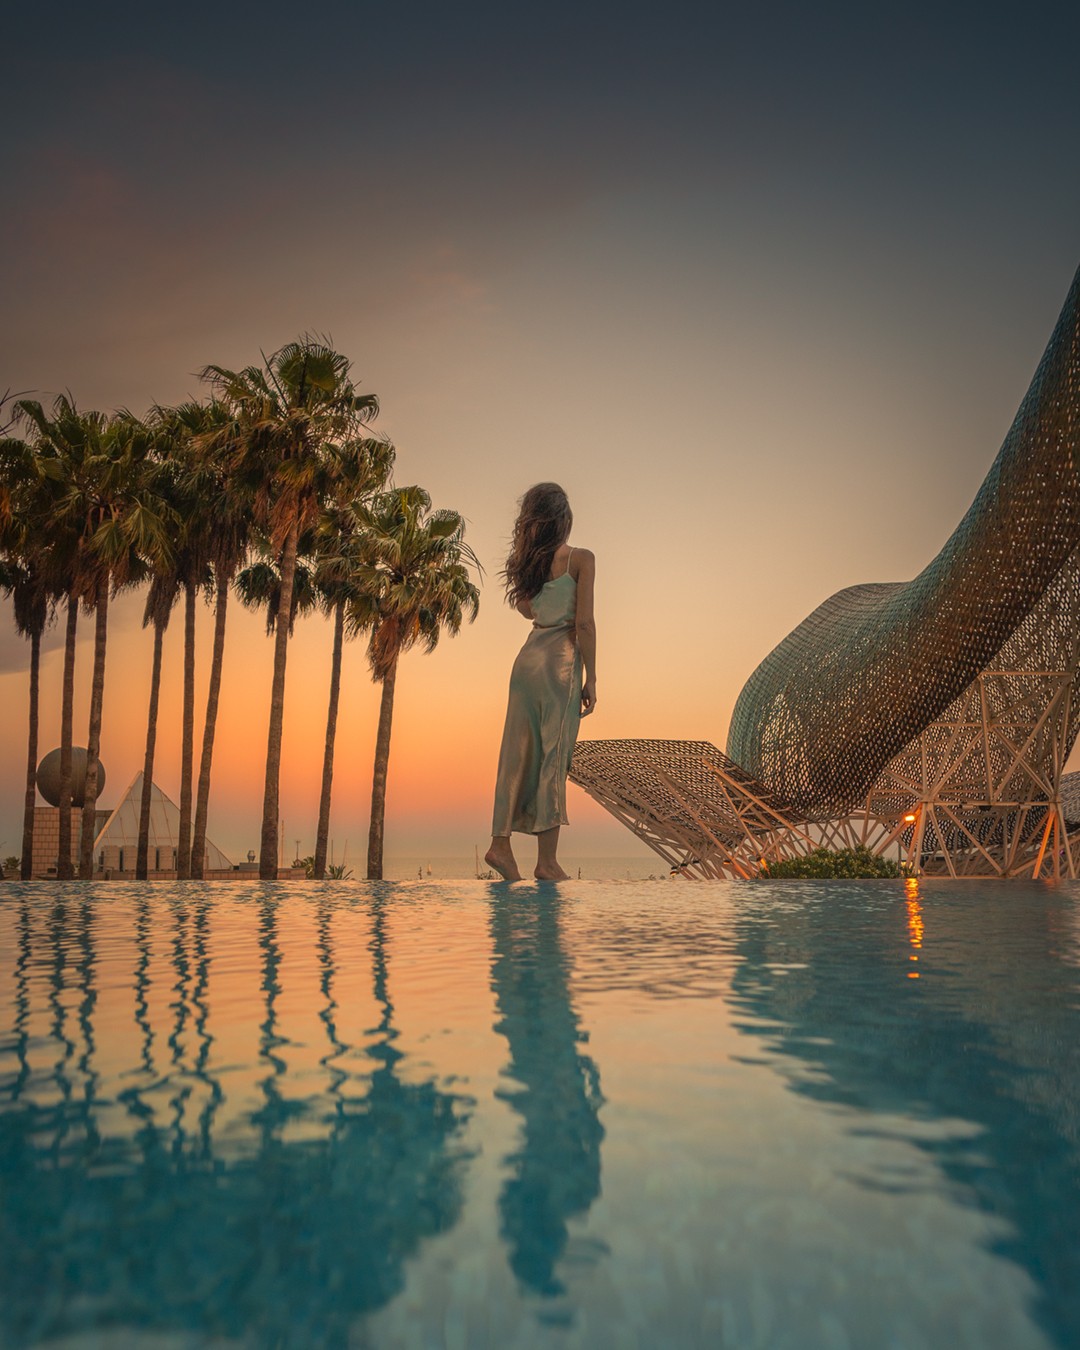 Endless sunsets to enjoy from The Infinity Pool